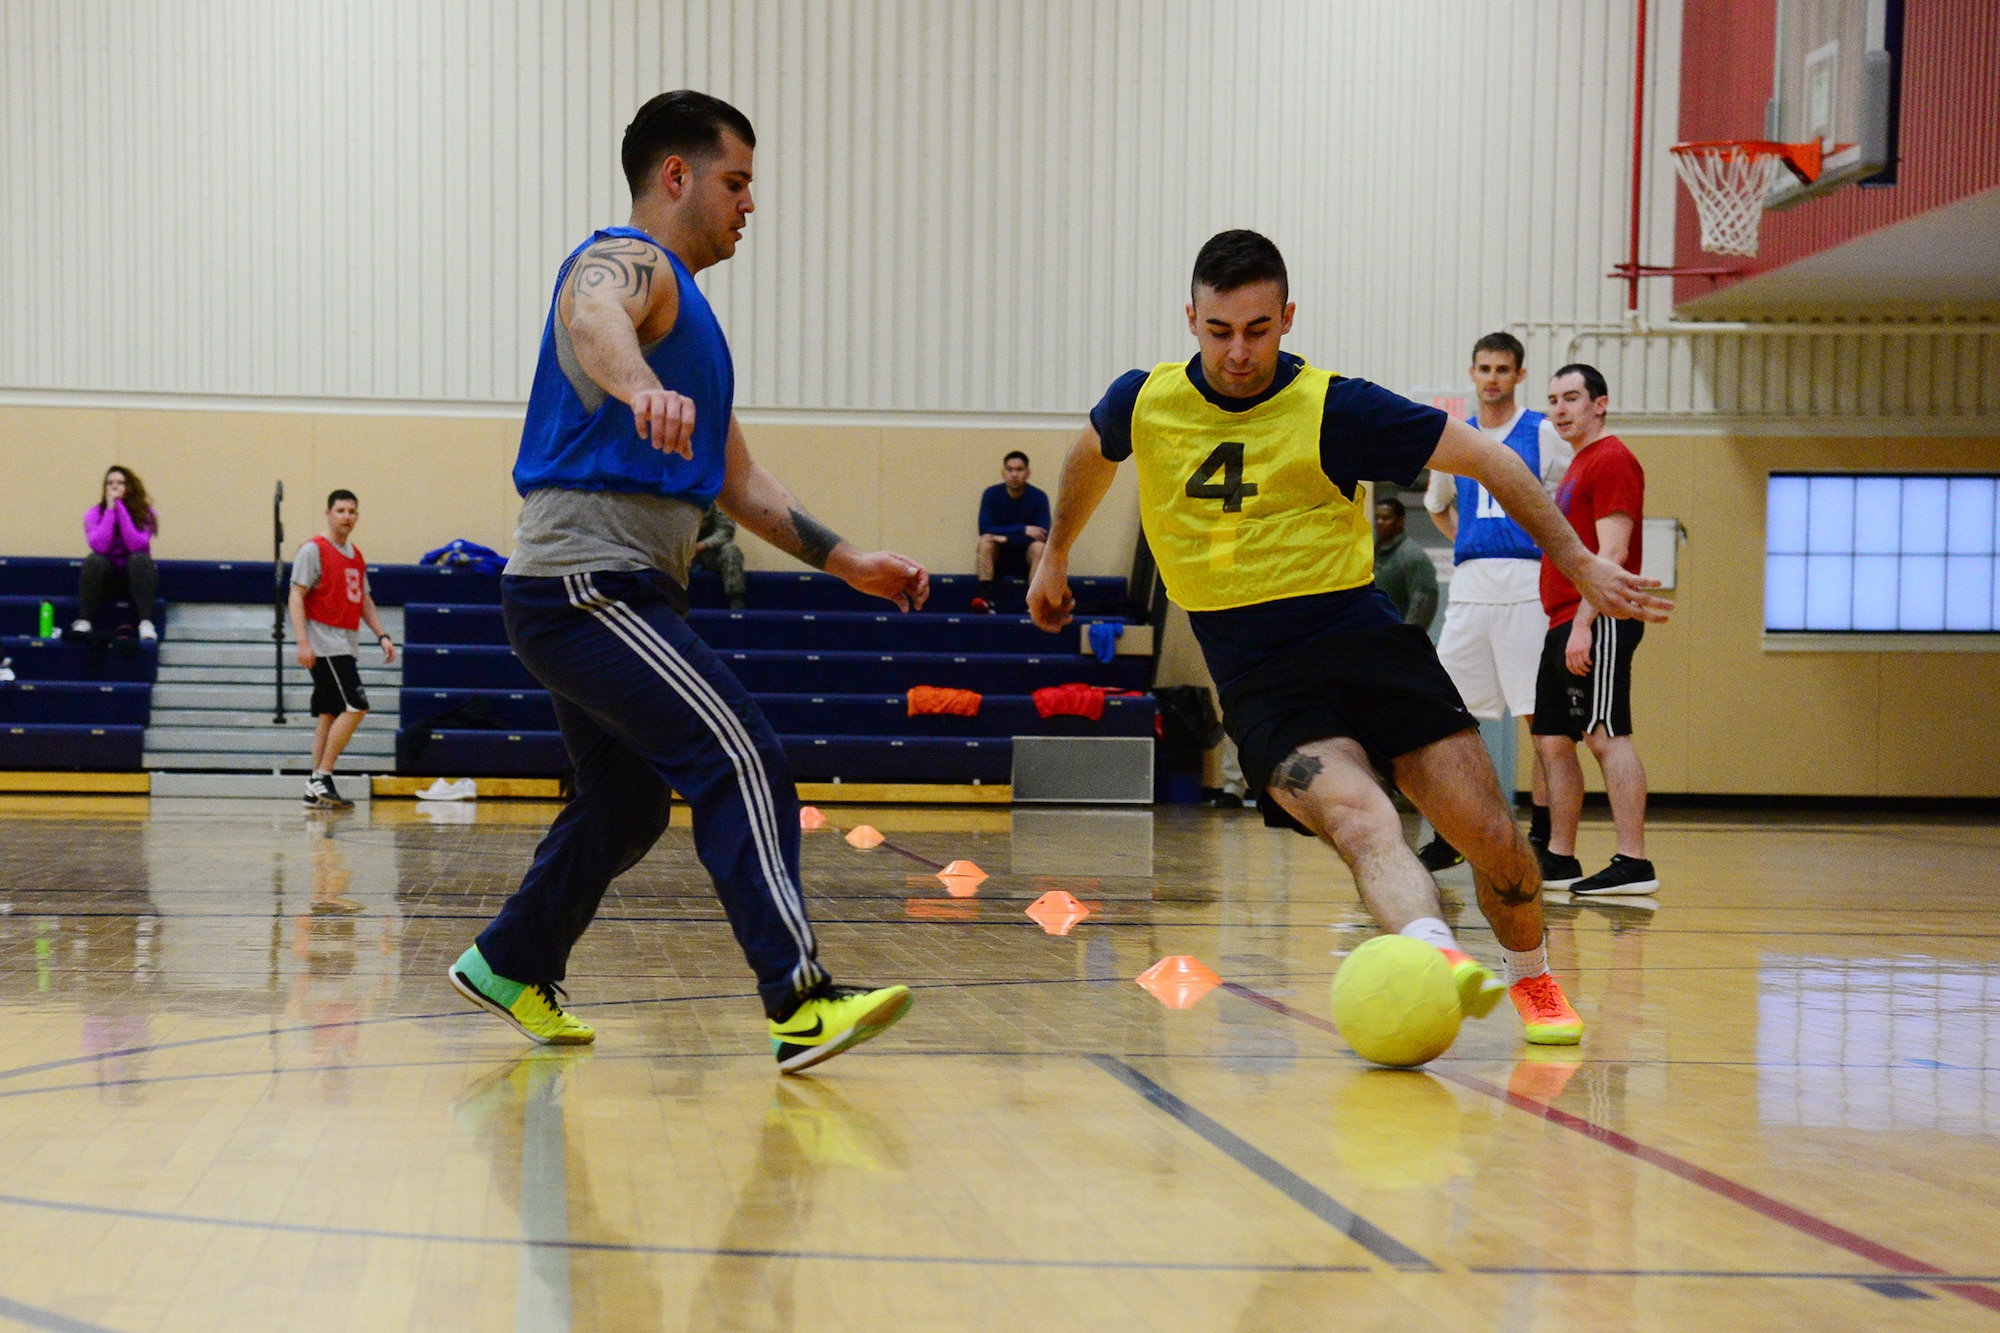 Airmen play indoor soccer at the fitness center Feb. 24, 2017, at Malmstrom Air Force Base, Mont. In addition to playing soccer for fun, the long-term goal is to form a team to represent Malmstrom at the Defender’s Cup, a world-cup type tournament open to base soccer teams representing any branch of service. (U.S. Air Force photo/Airman 1st Class Magen M. Reeves)